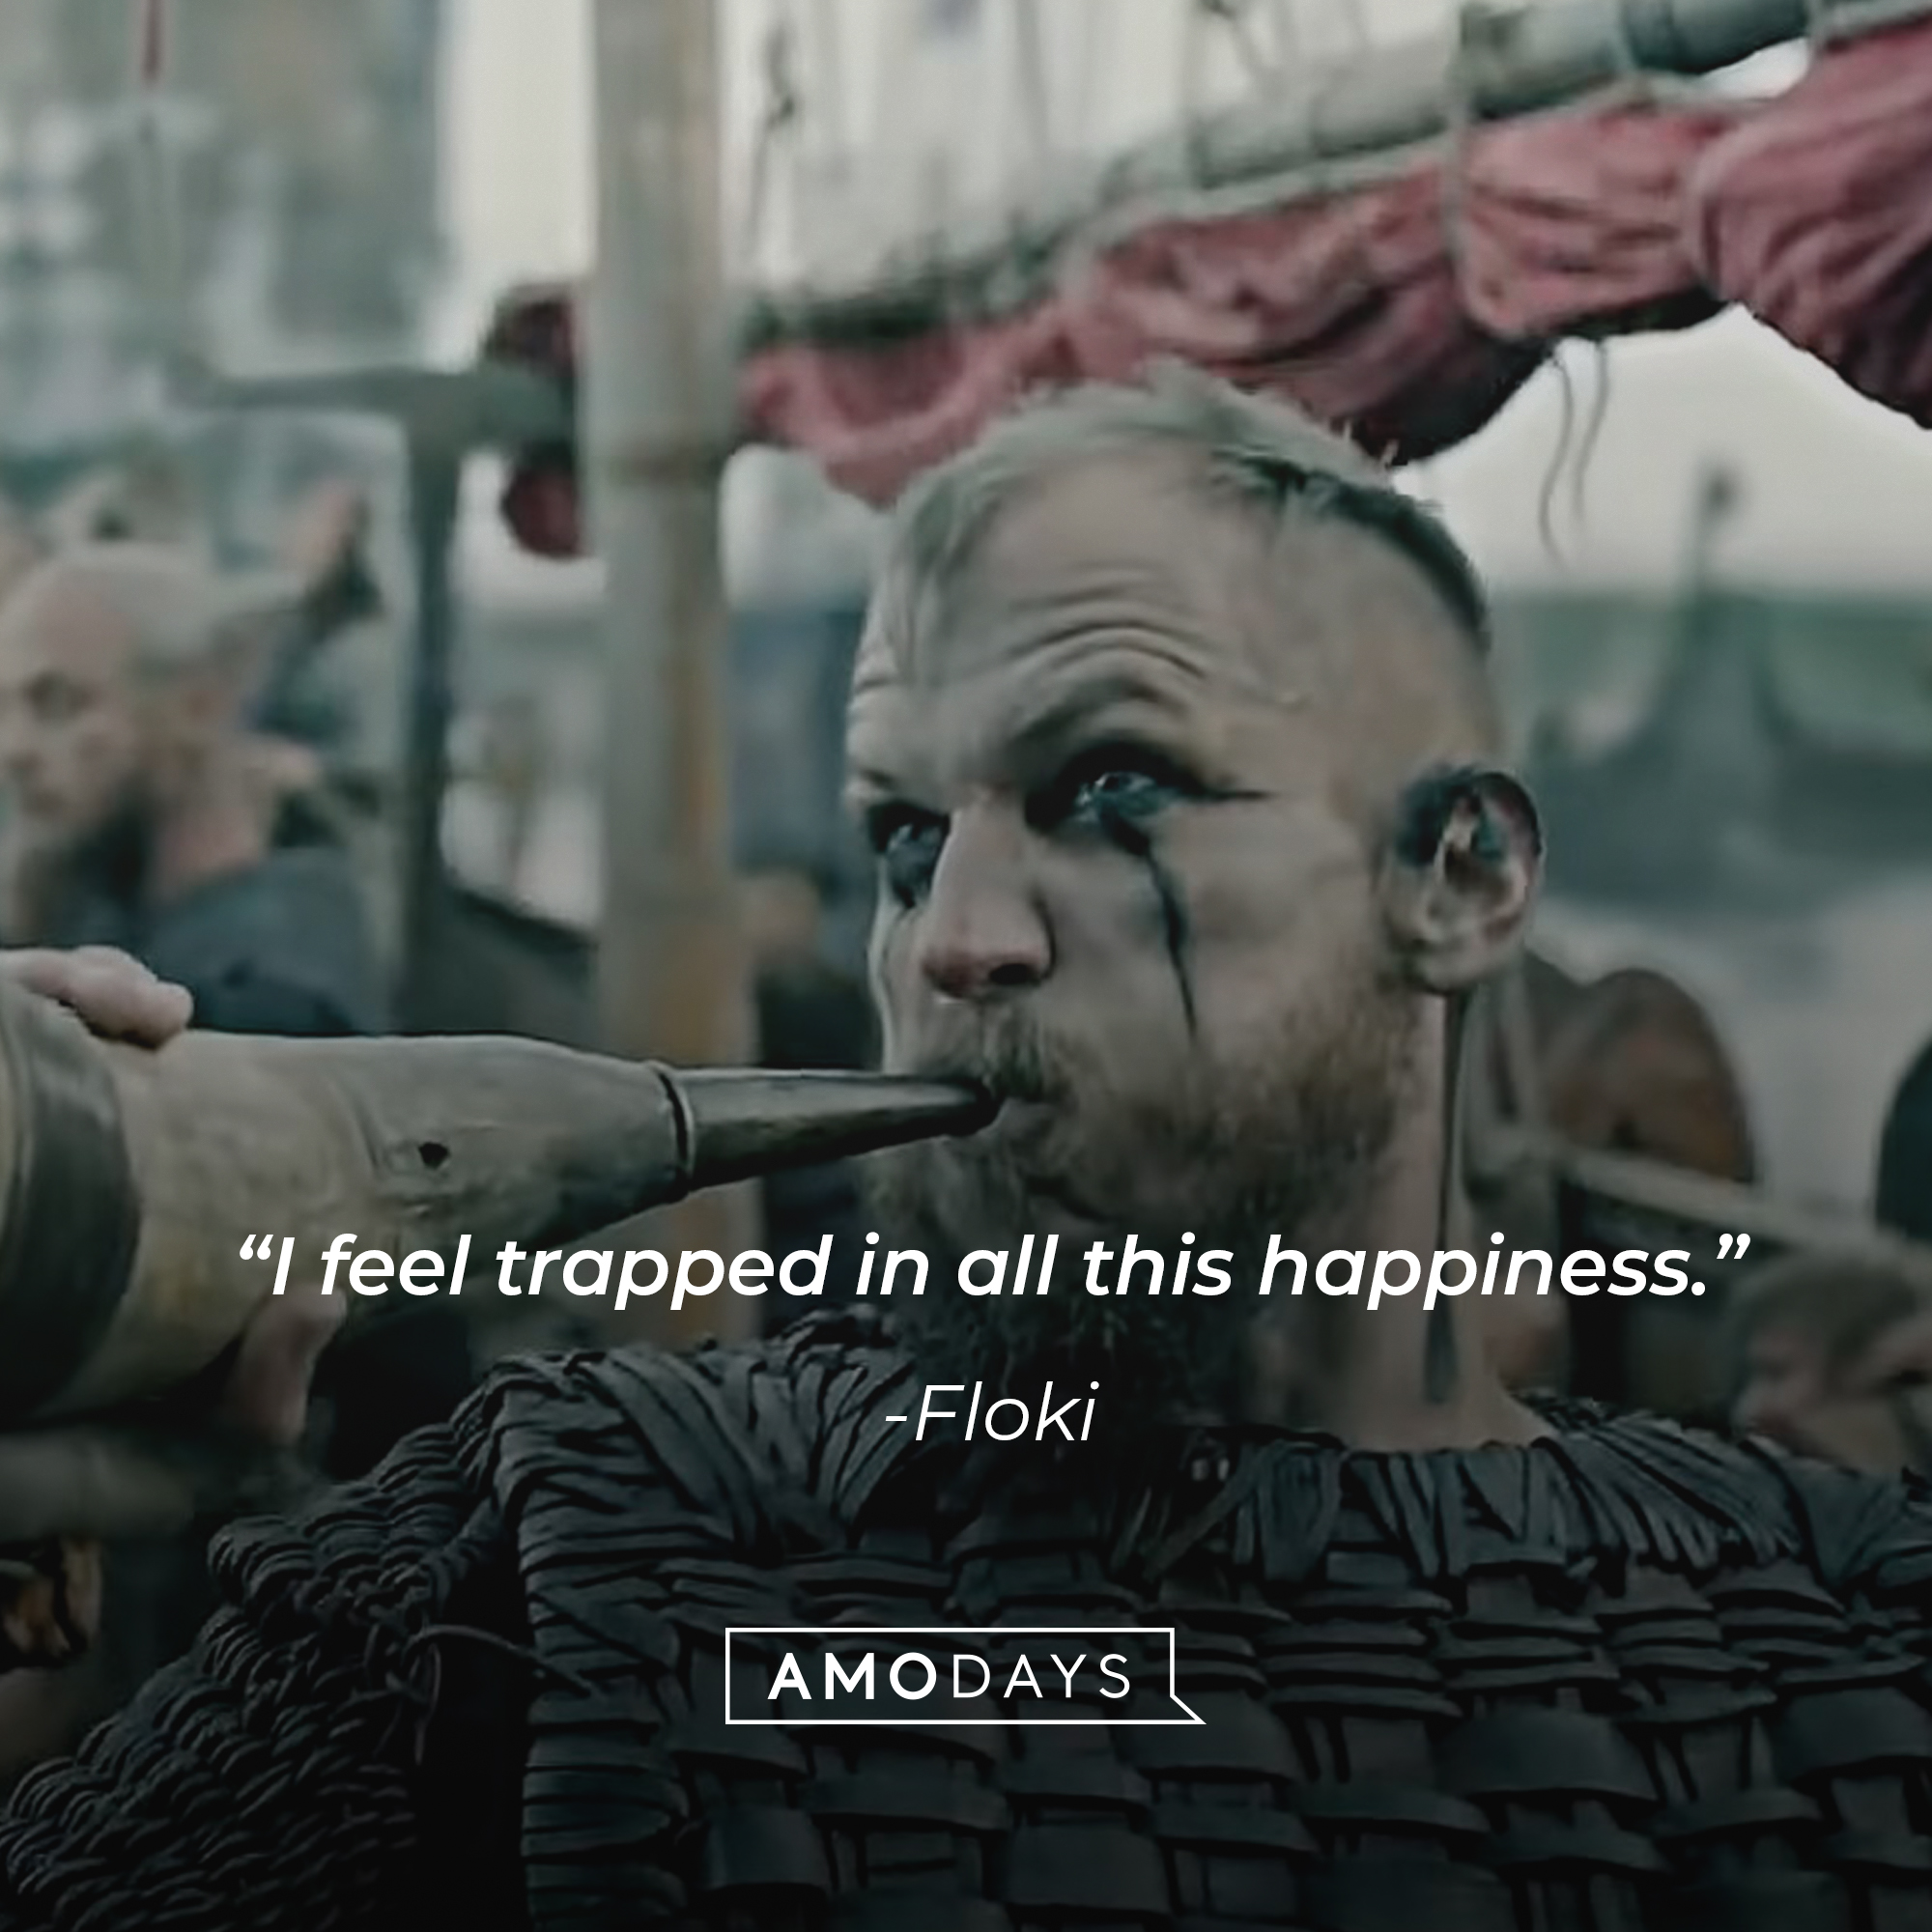 An image of Floki with his quote: “I feel trapped in all this happiness.” | Source: facebook.com/Vikings